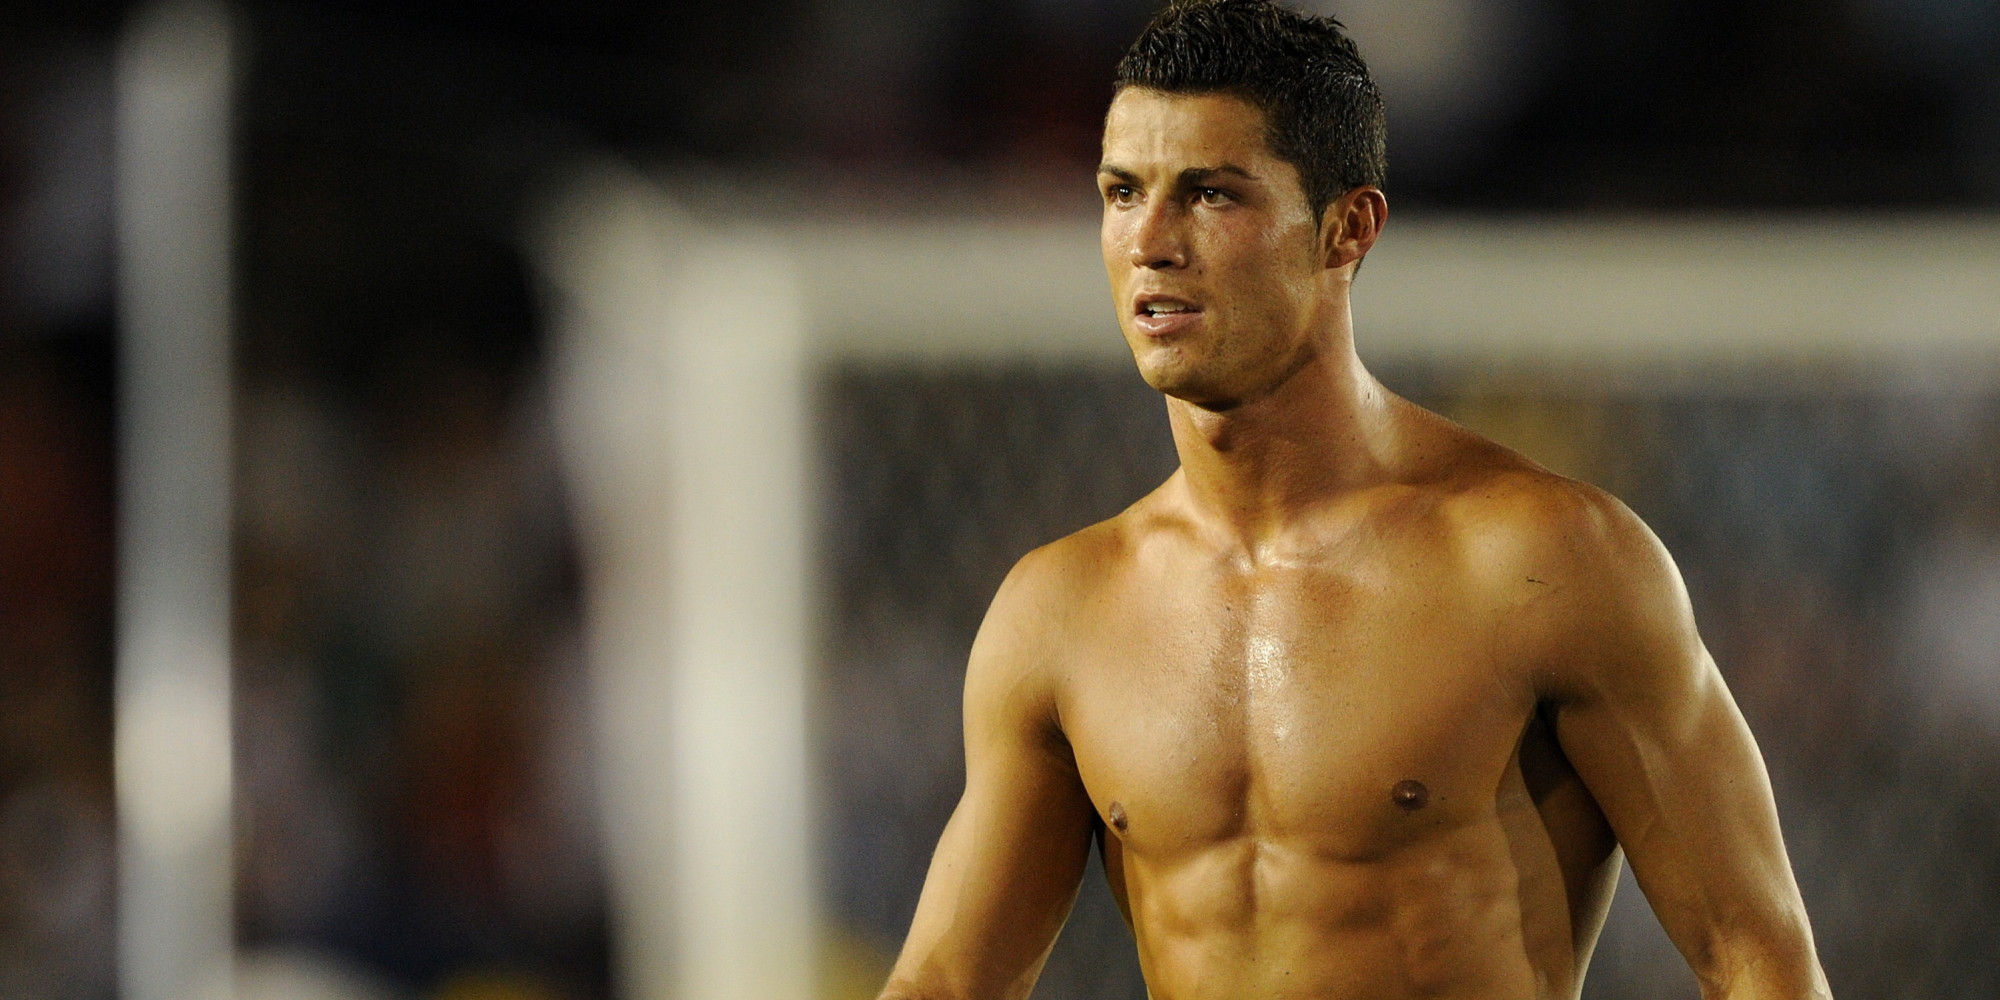 Cristiano Ronaldo Is The Definition Of Perfection